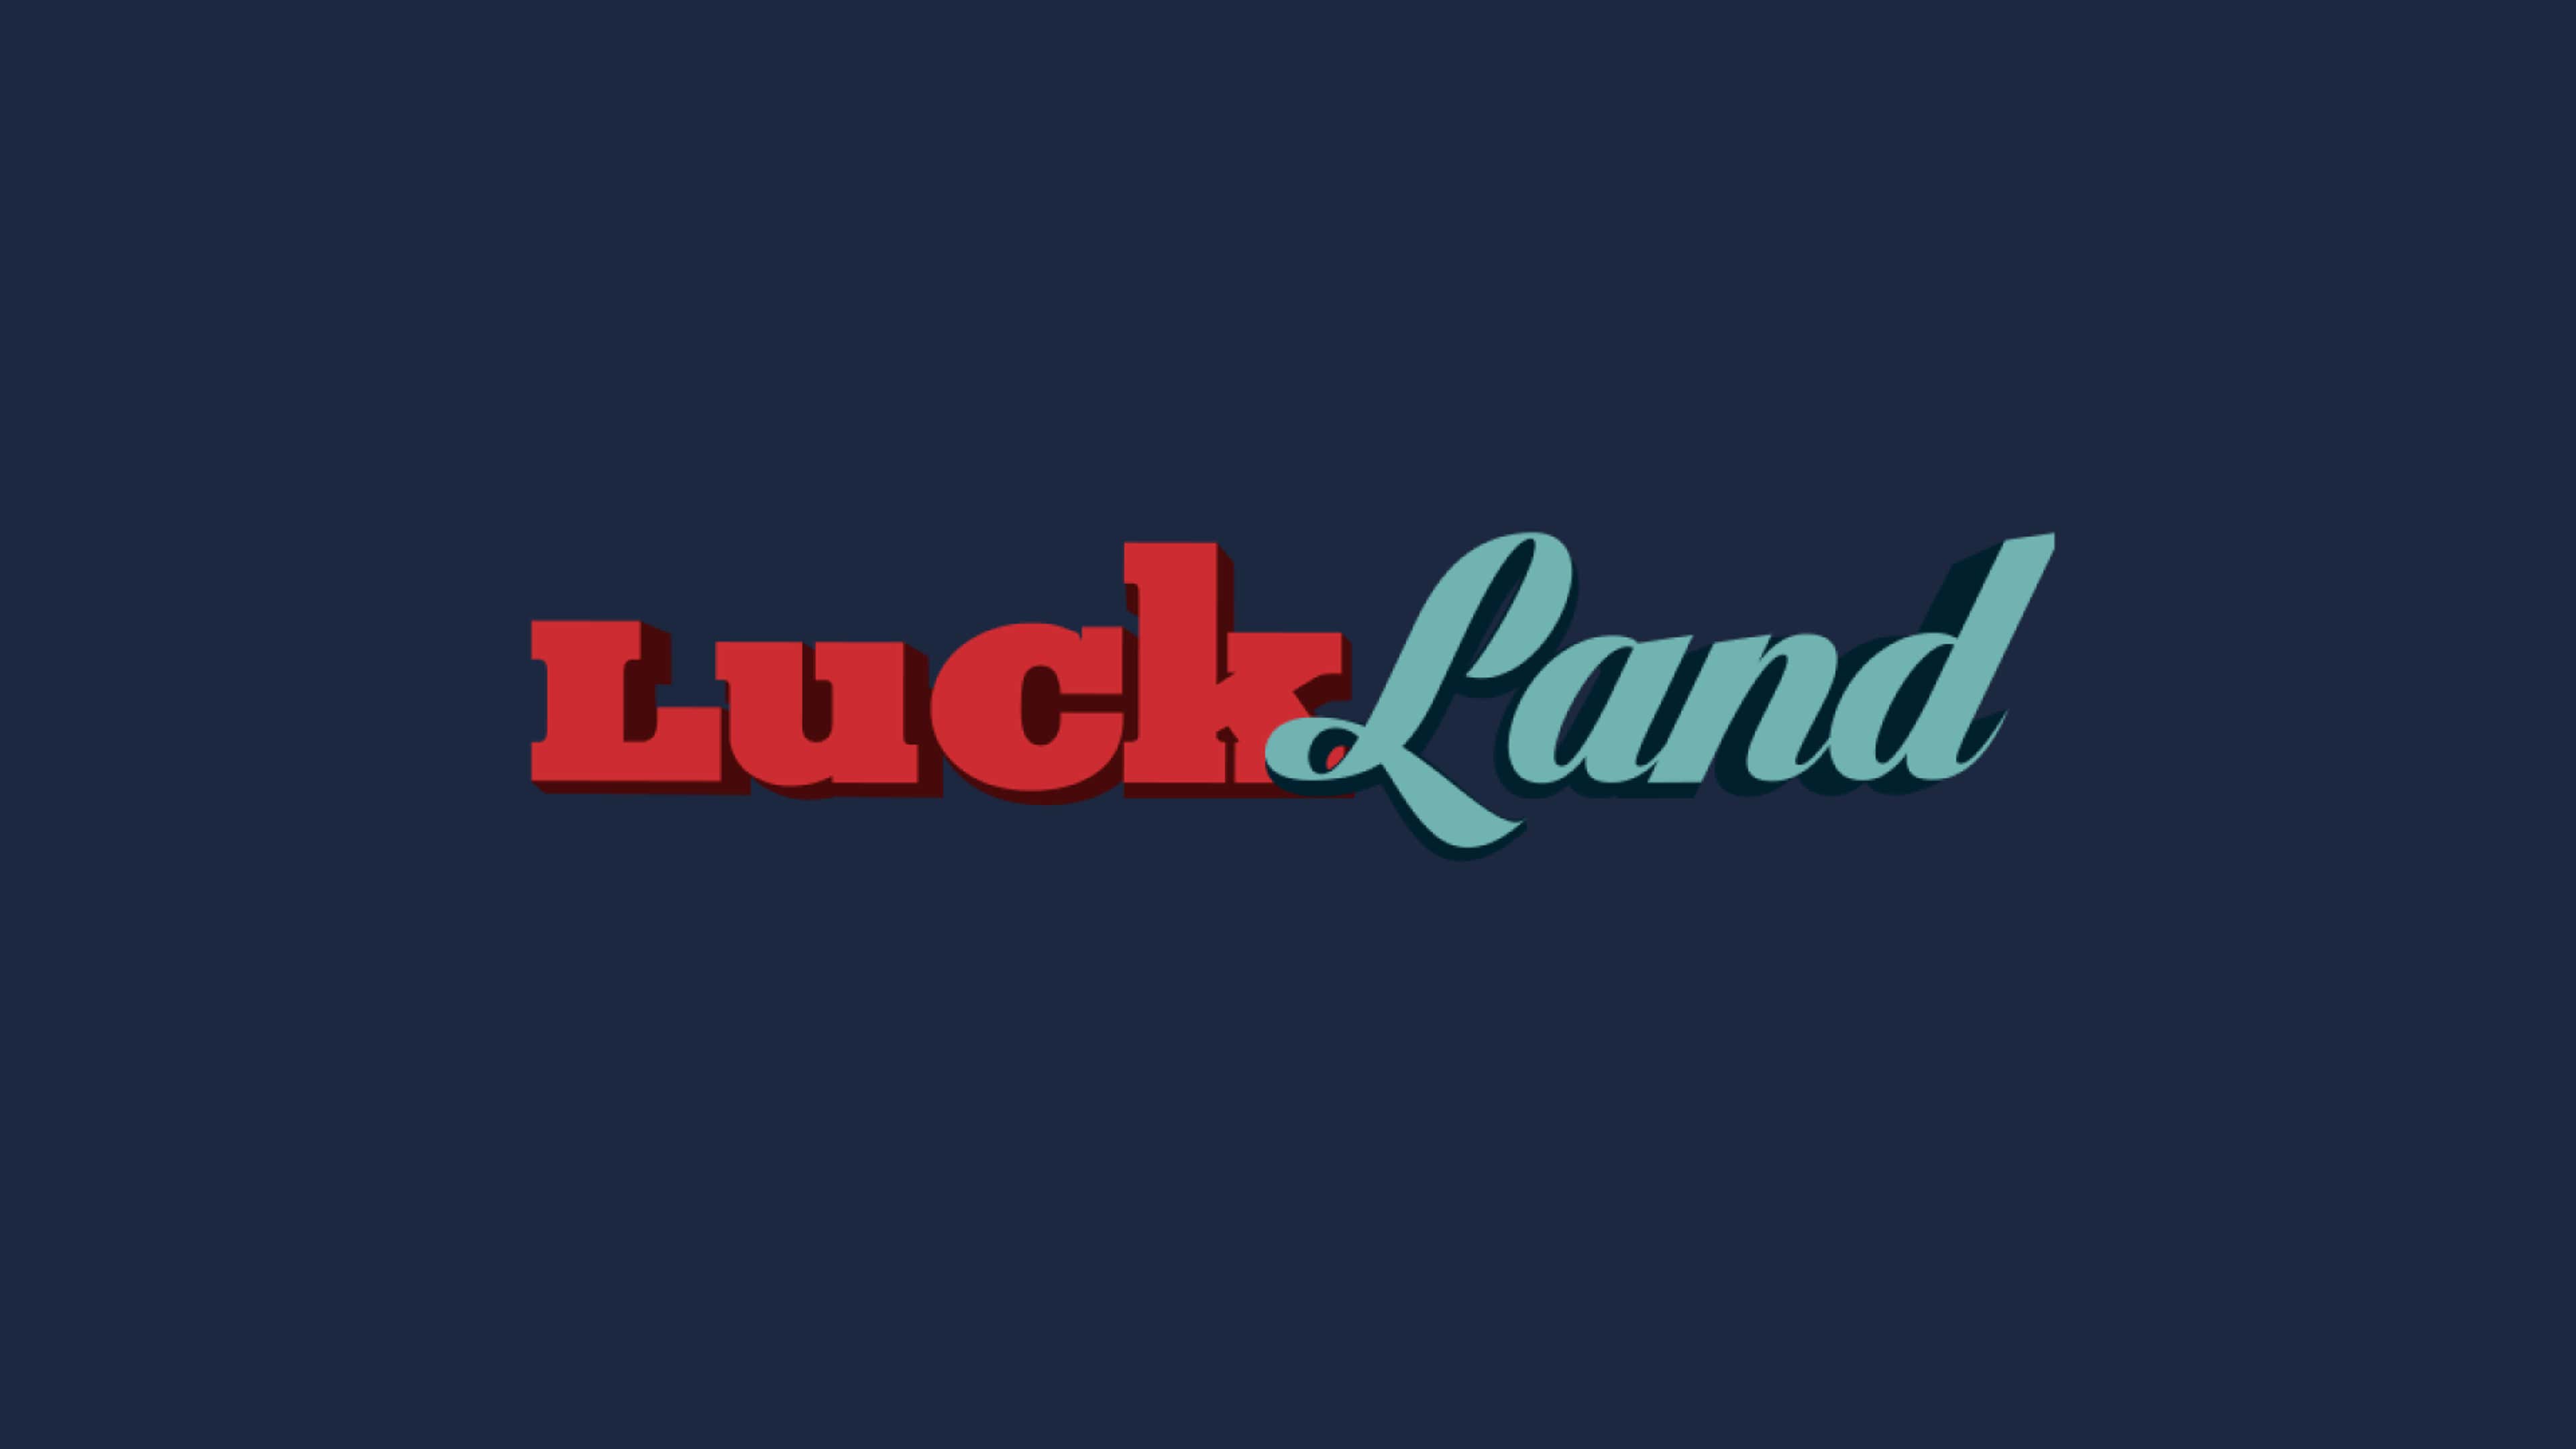 LuckLand Promo Code and Sign Up Offer